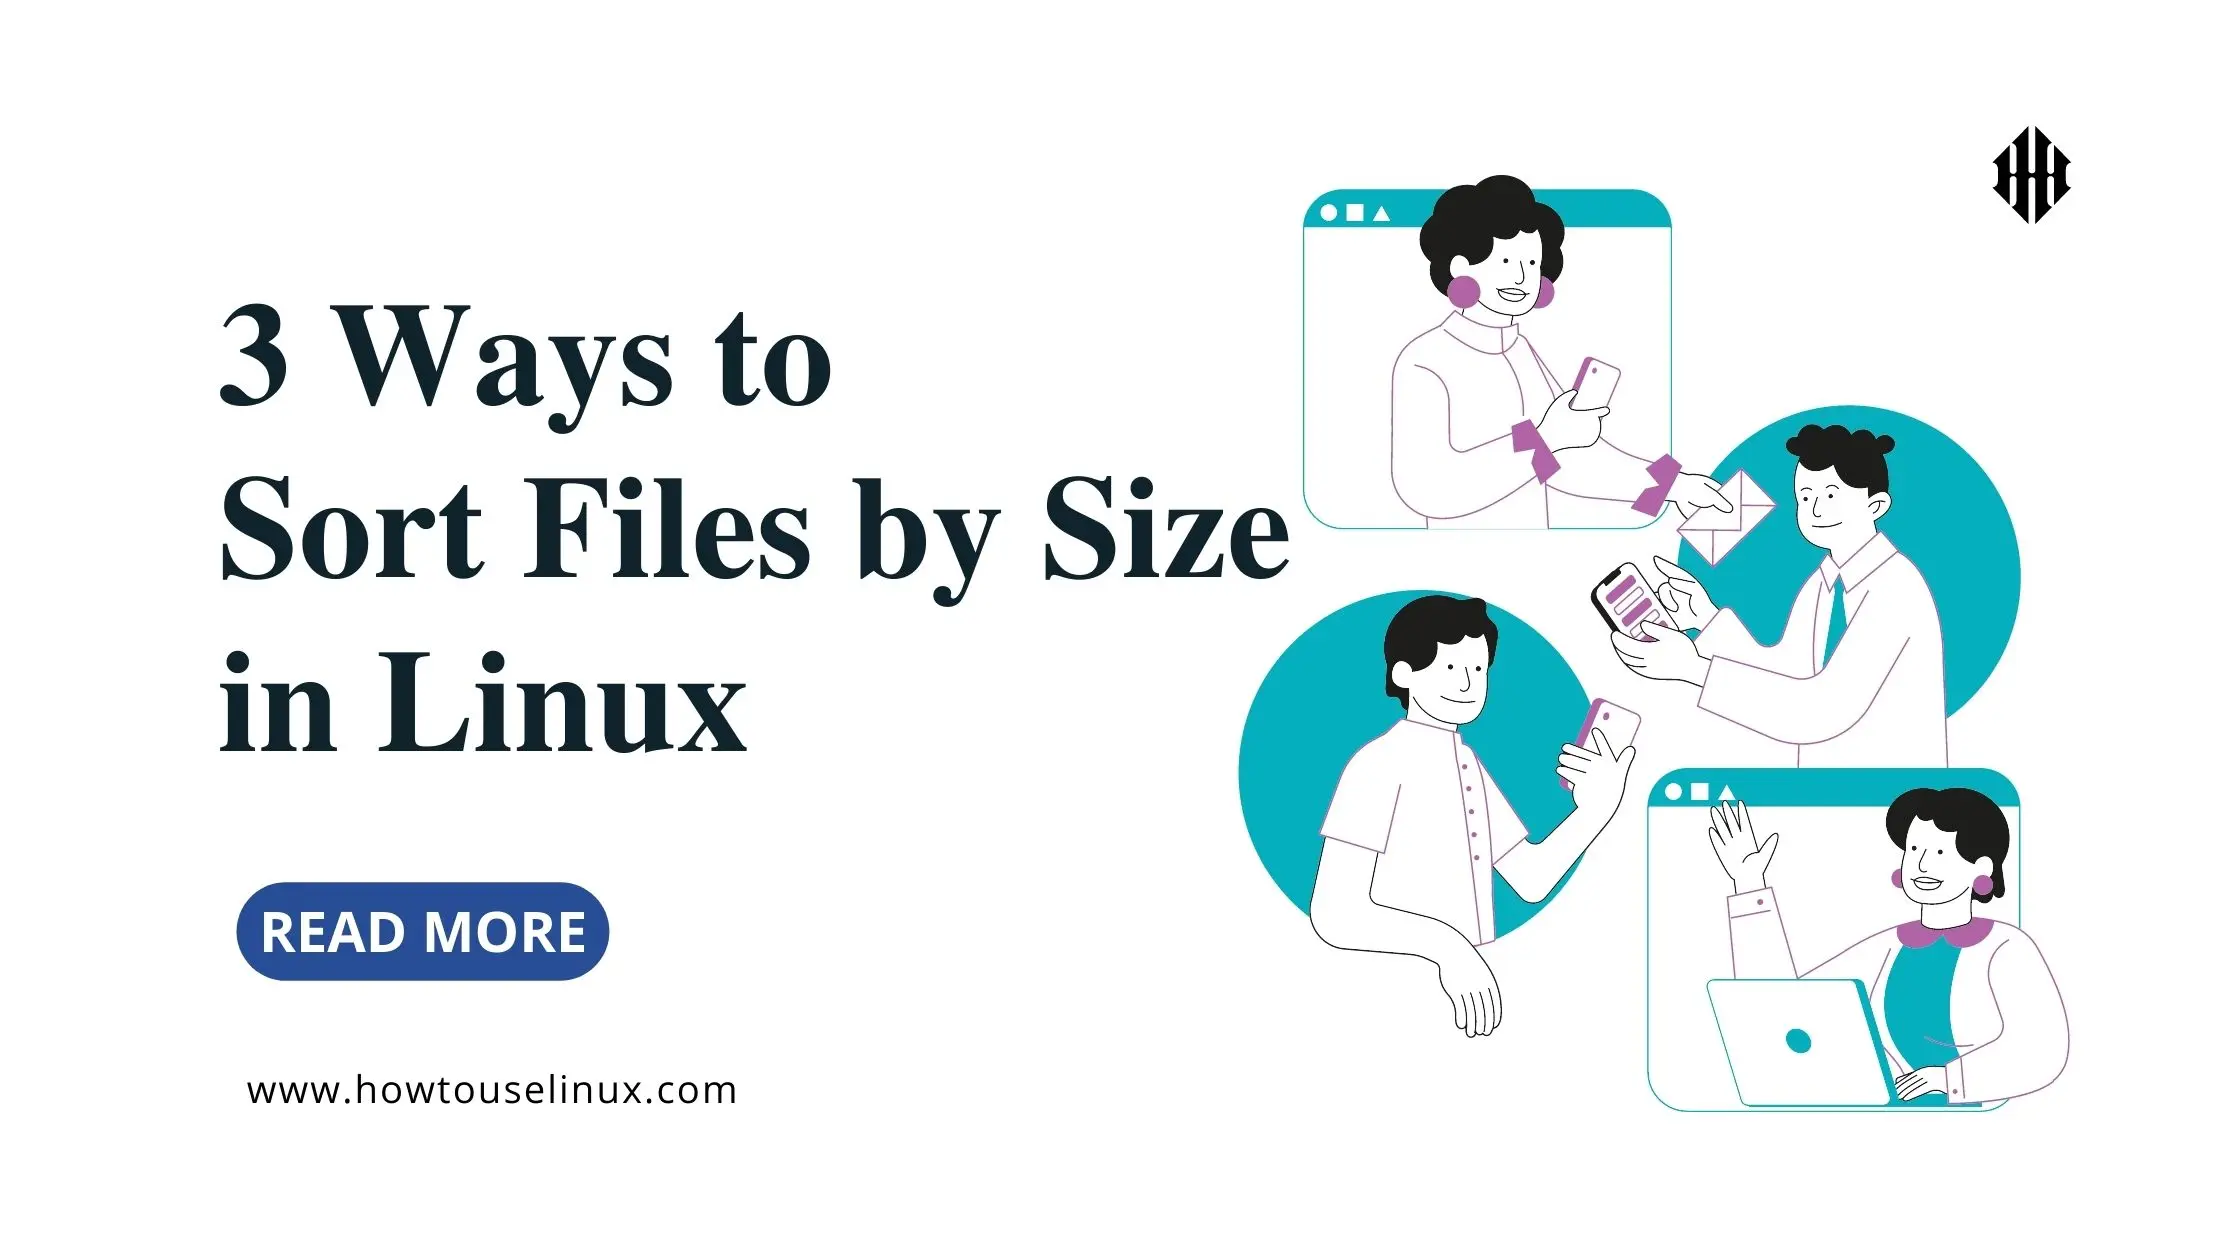 3-ways-to-sort-files-by-size-in-linux-howtouselinux